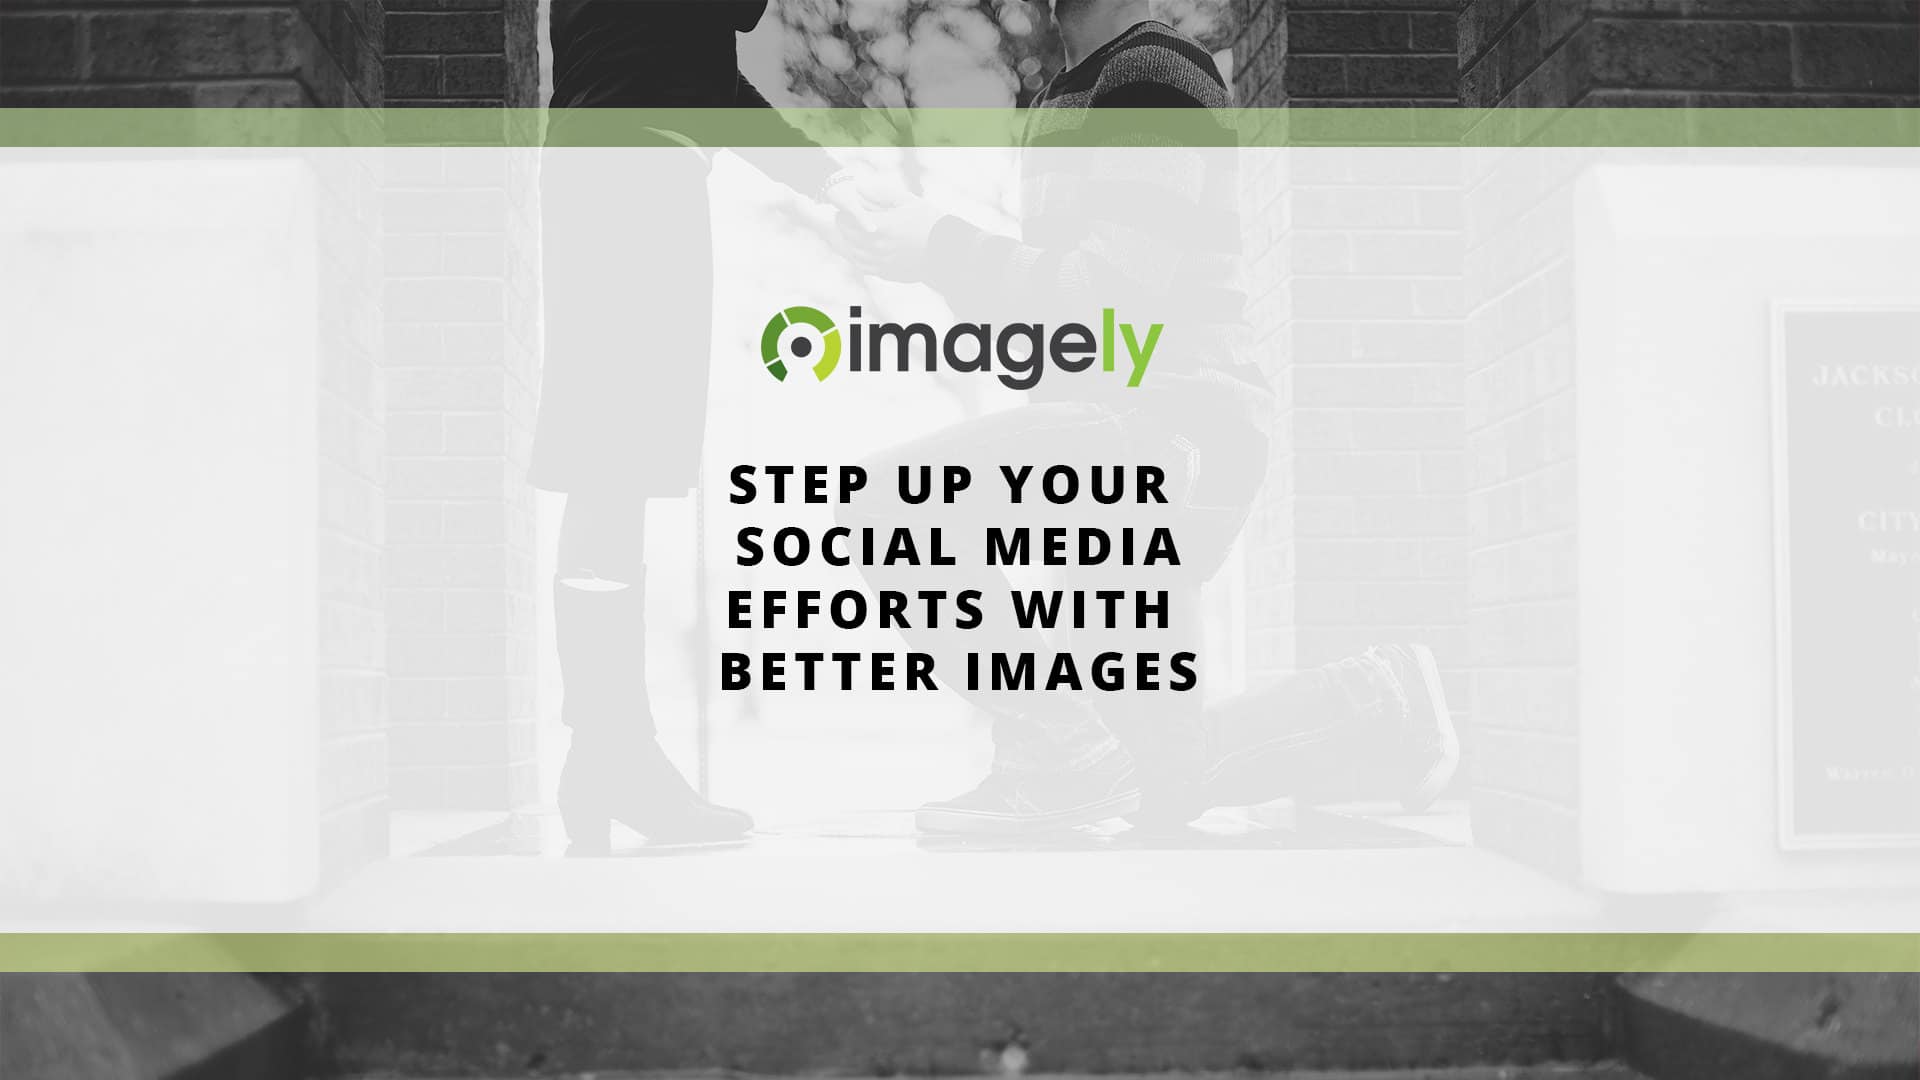 Step up your social media efforts with better images